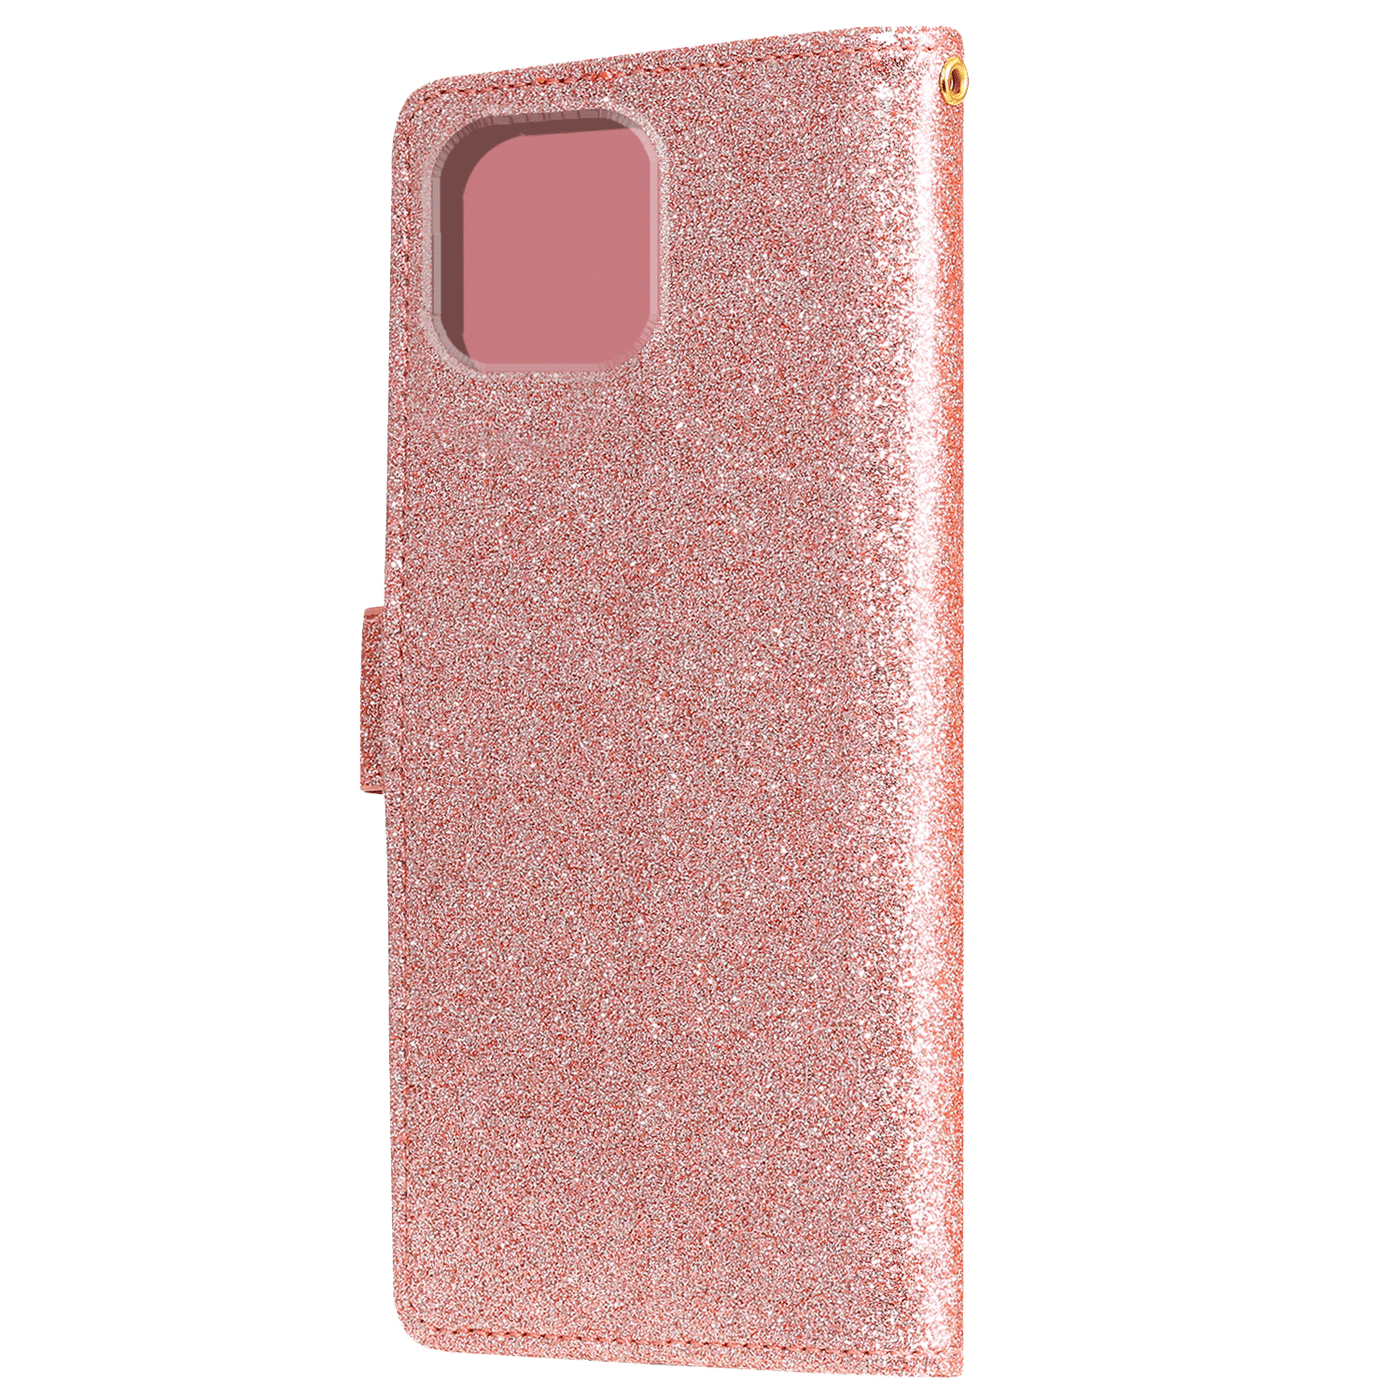 Excelsior Premium Leather Glitter Wallet Flip Case Cover For Apple iPhone 11 Pro